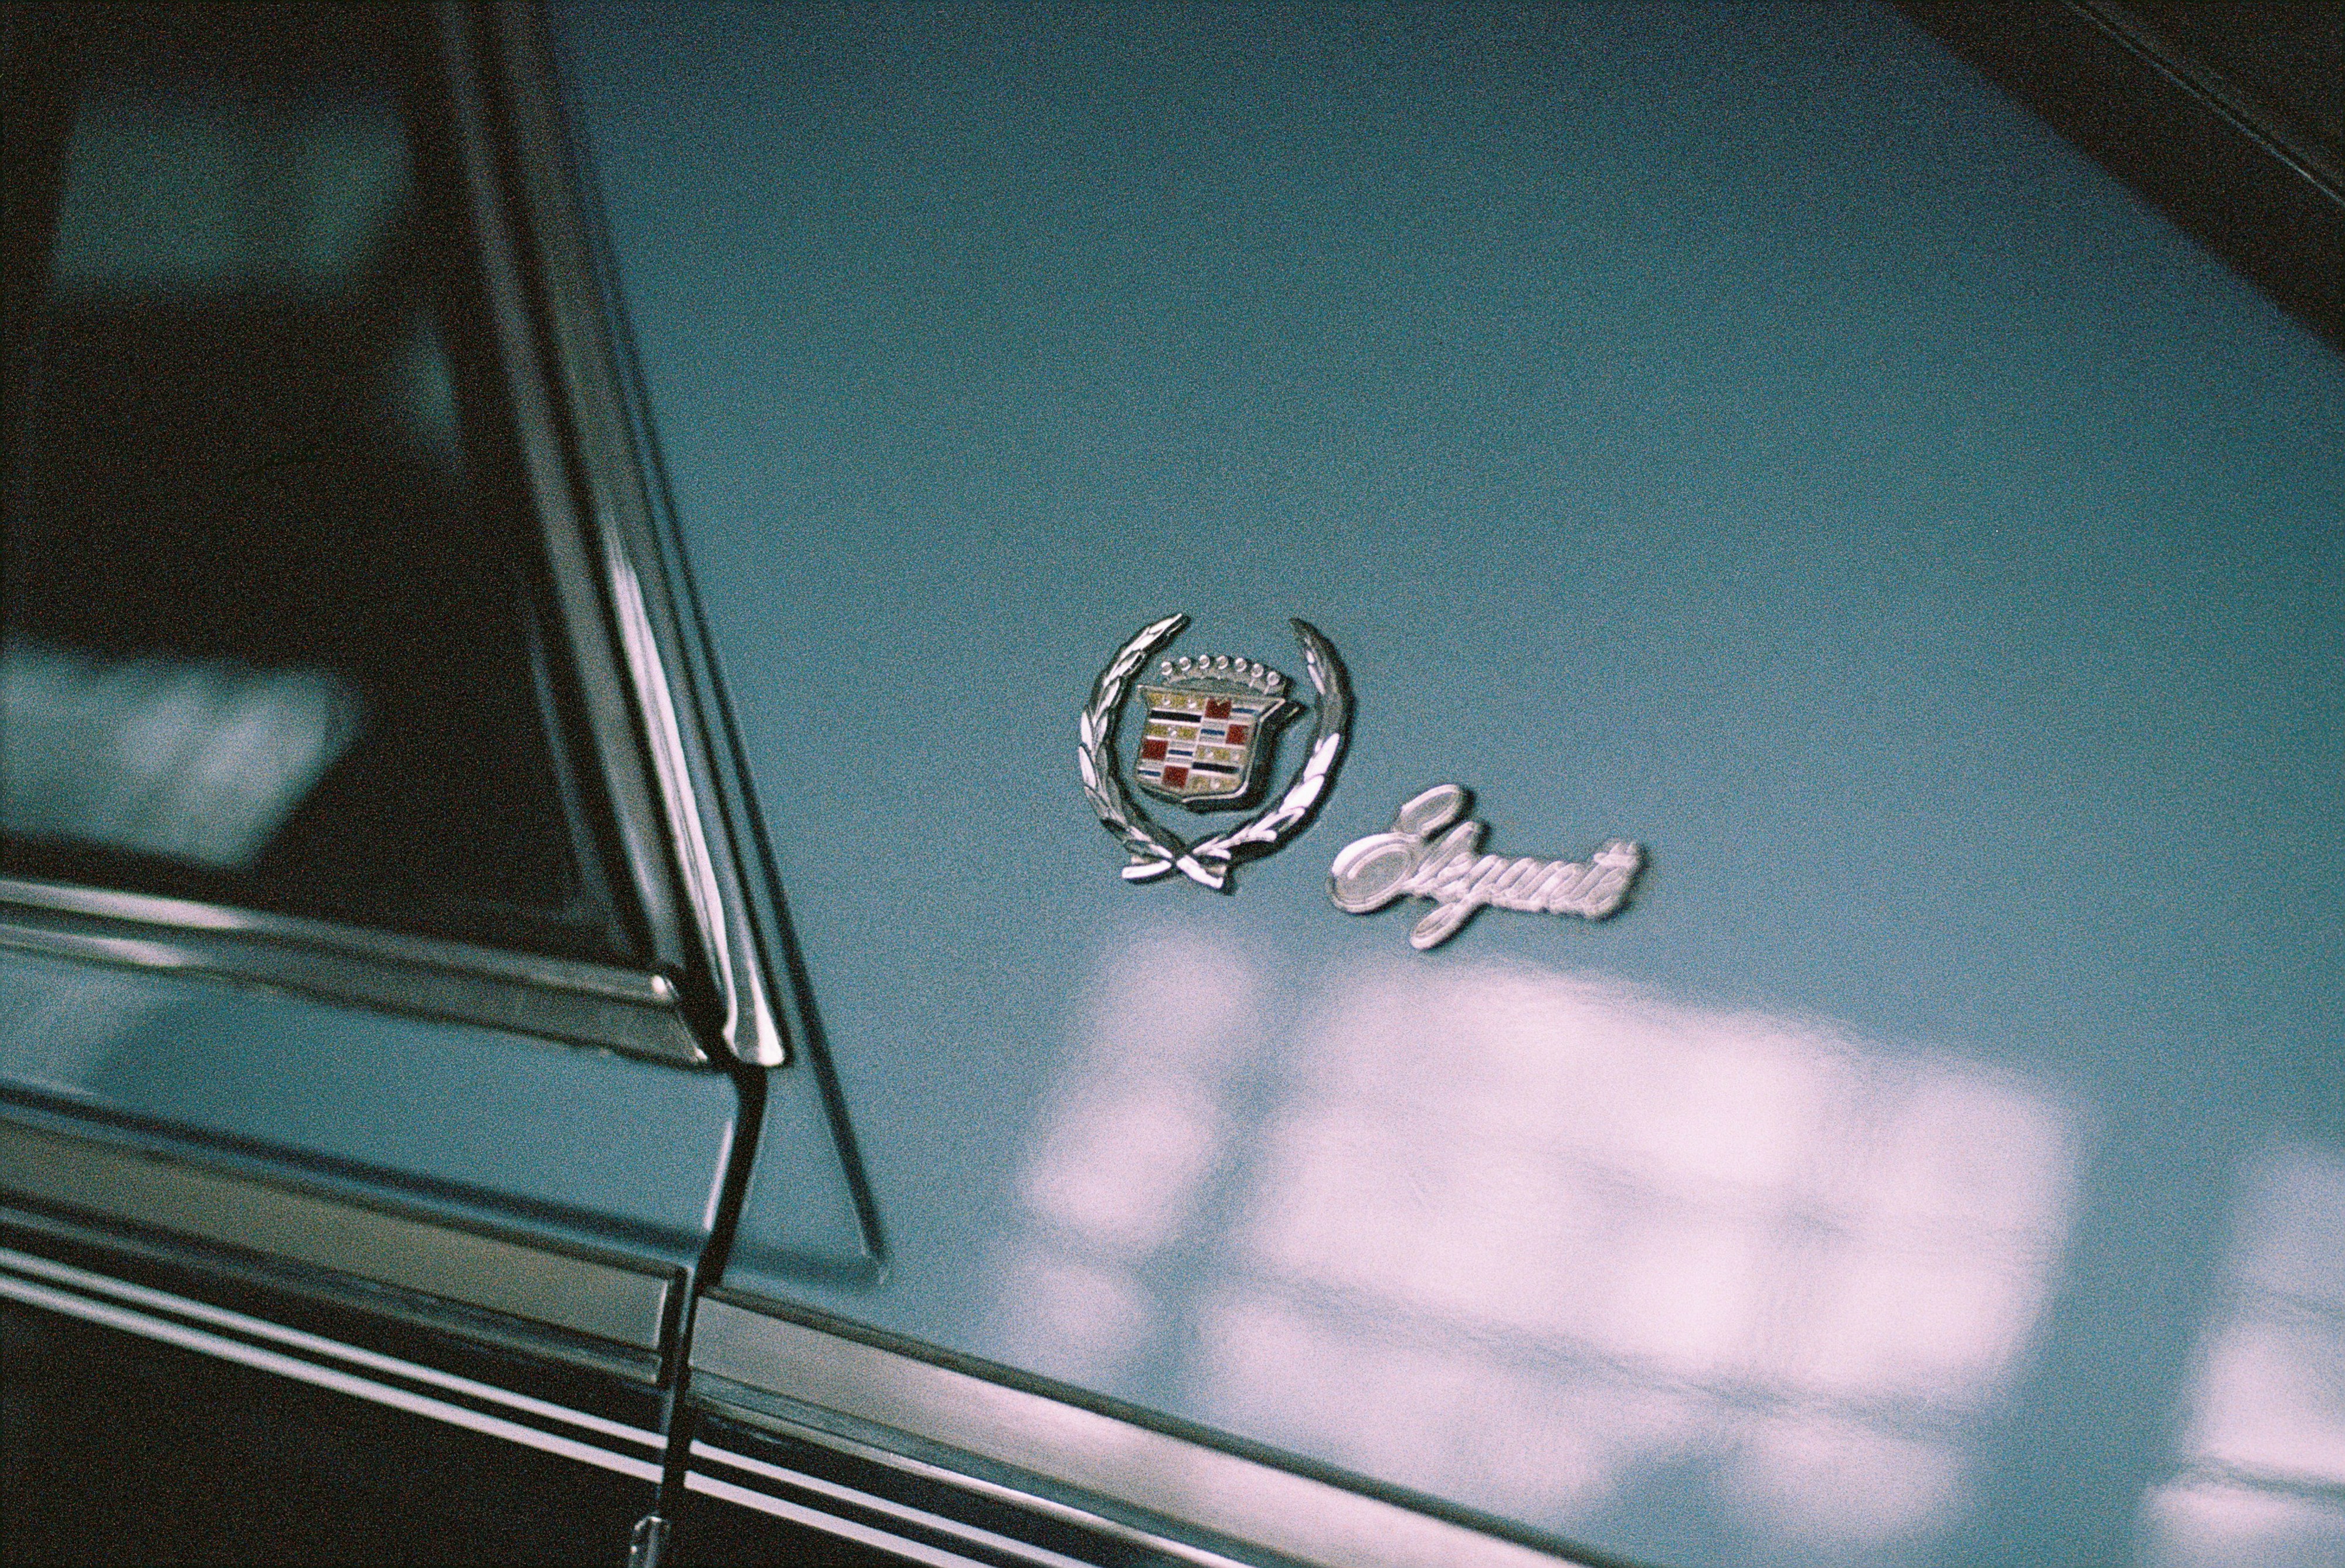 Vintage classic US car oldtimer limousine. Made with Leica R7 (Year: 1994) and Leica Summilux-R 1.4 50mm (Year: 1983). Analog scan via nimmfilm.de: Fuji Frontier SP-3000. Kodakcolor 200 VRplus (expired 1999)